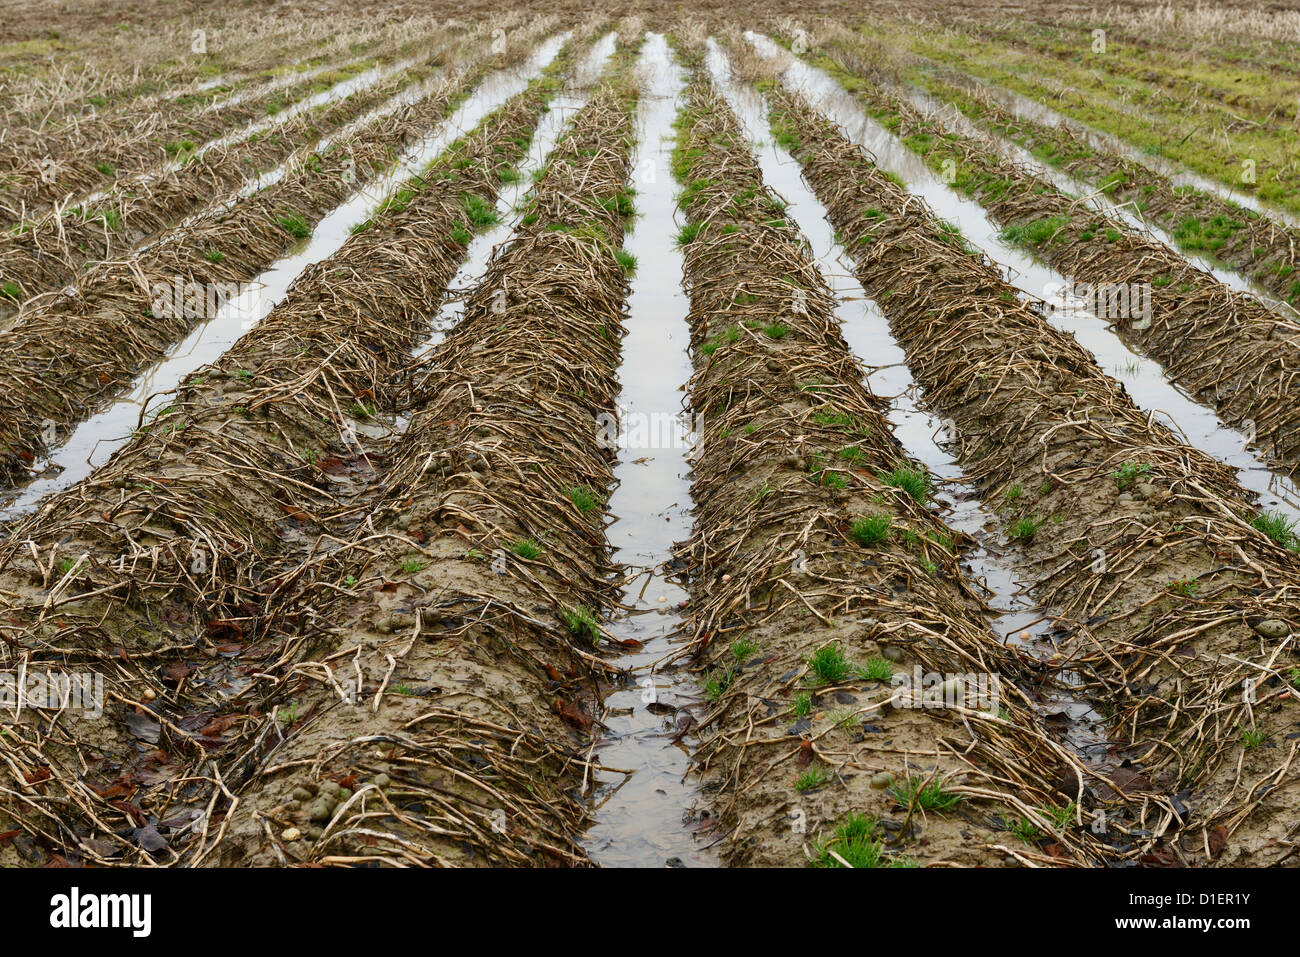 Flooded farmers field with a ruined crop of potatoes Stock Photo